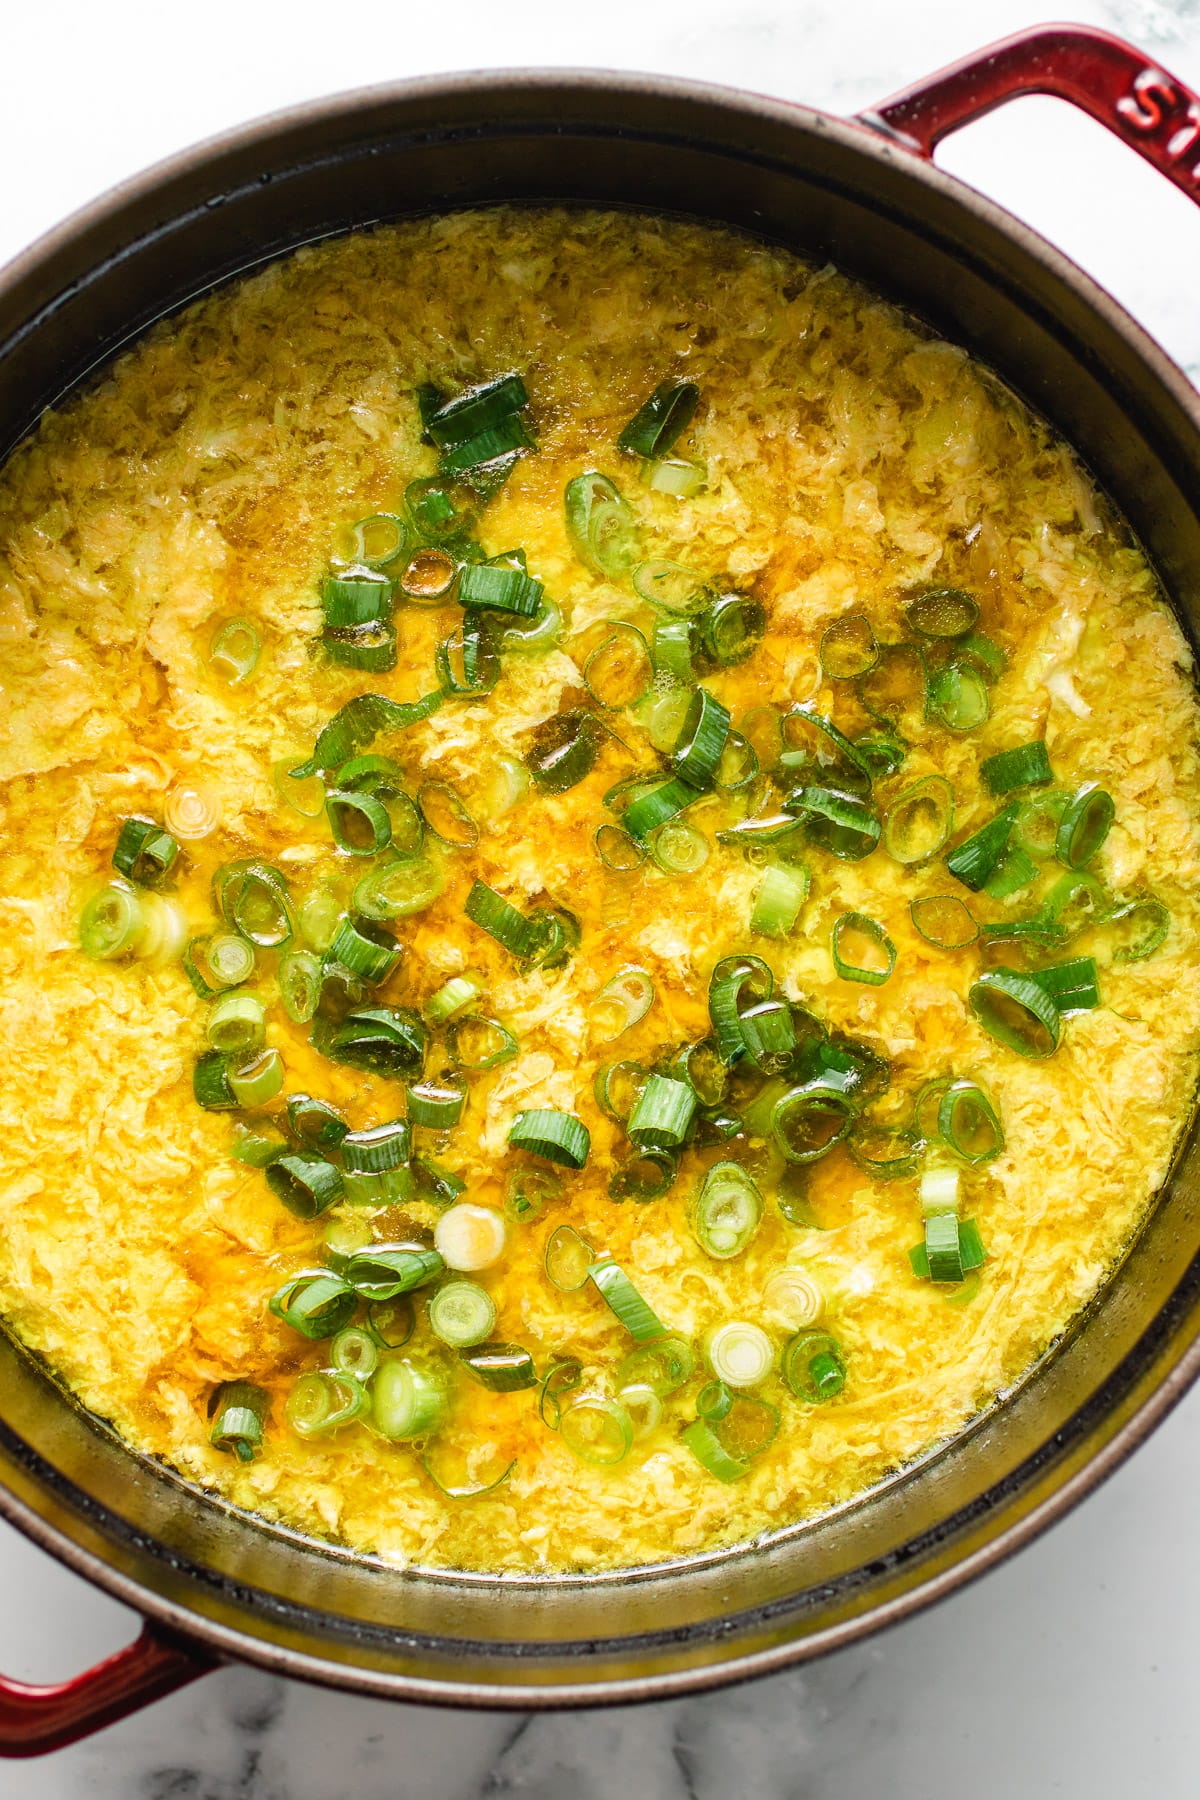 Image shows healthy egg drop soup made in a large pot with chicken and egg flowers.